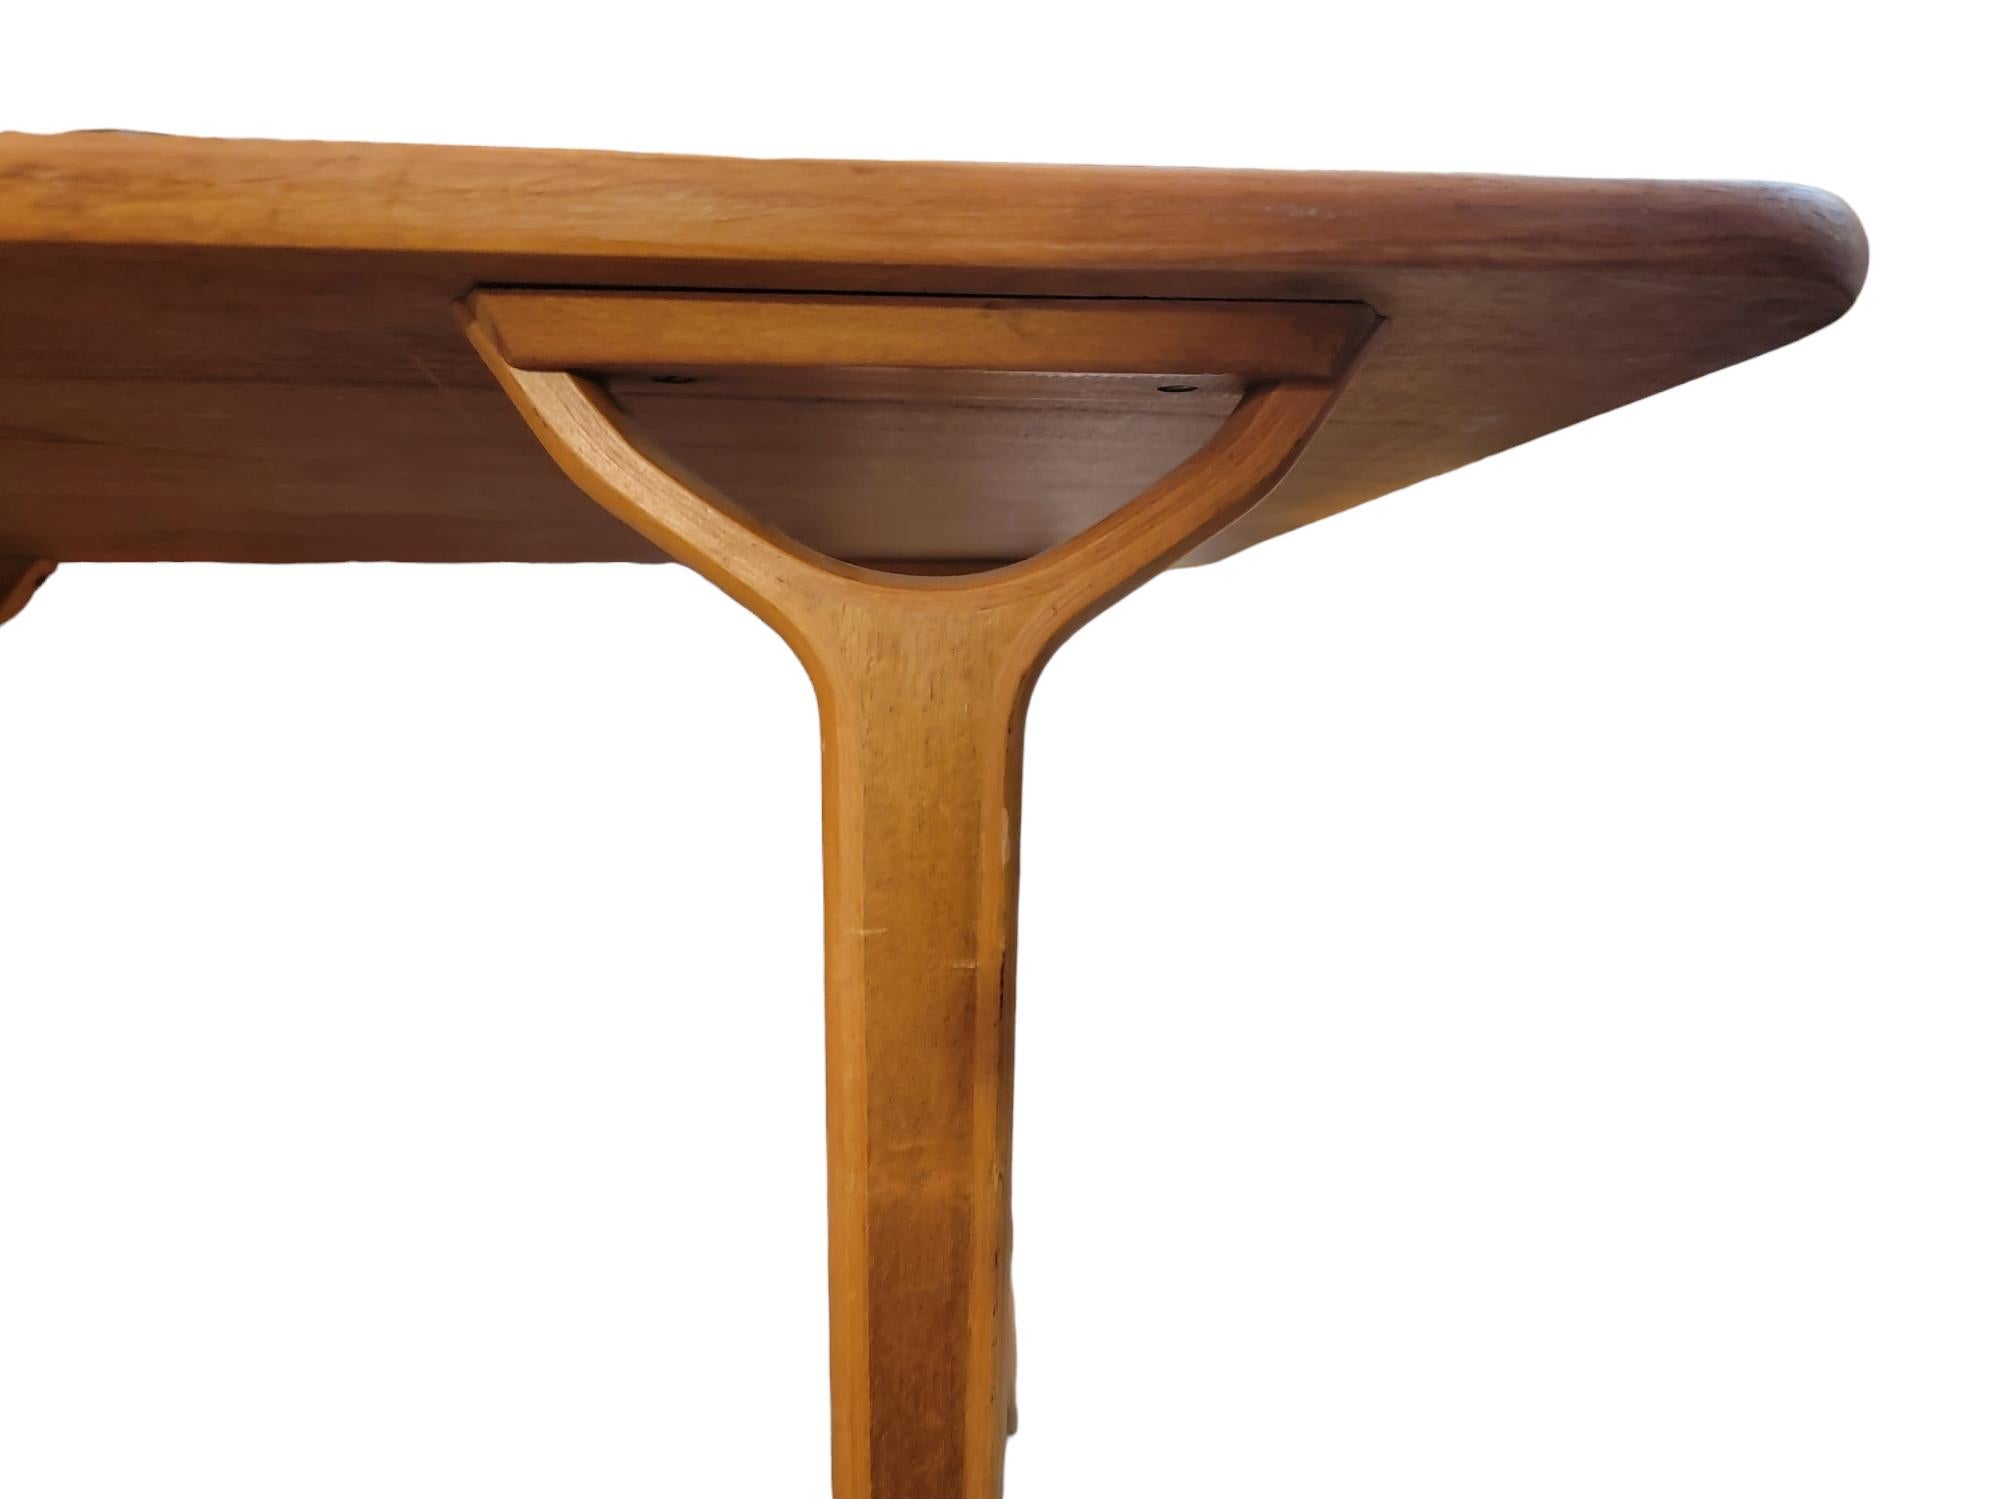 Danish Peter Hvidt Teak Library Table or Coffee Table In Good Condition For Sale In Pasadena, CA